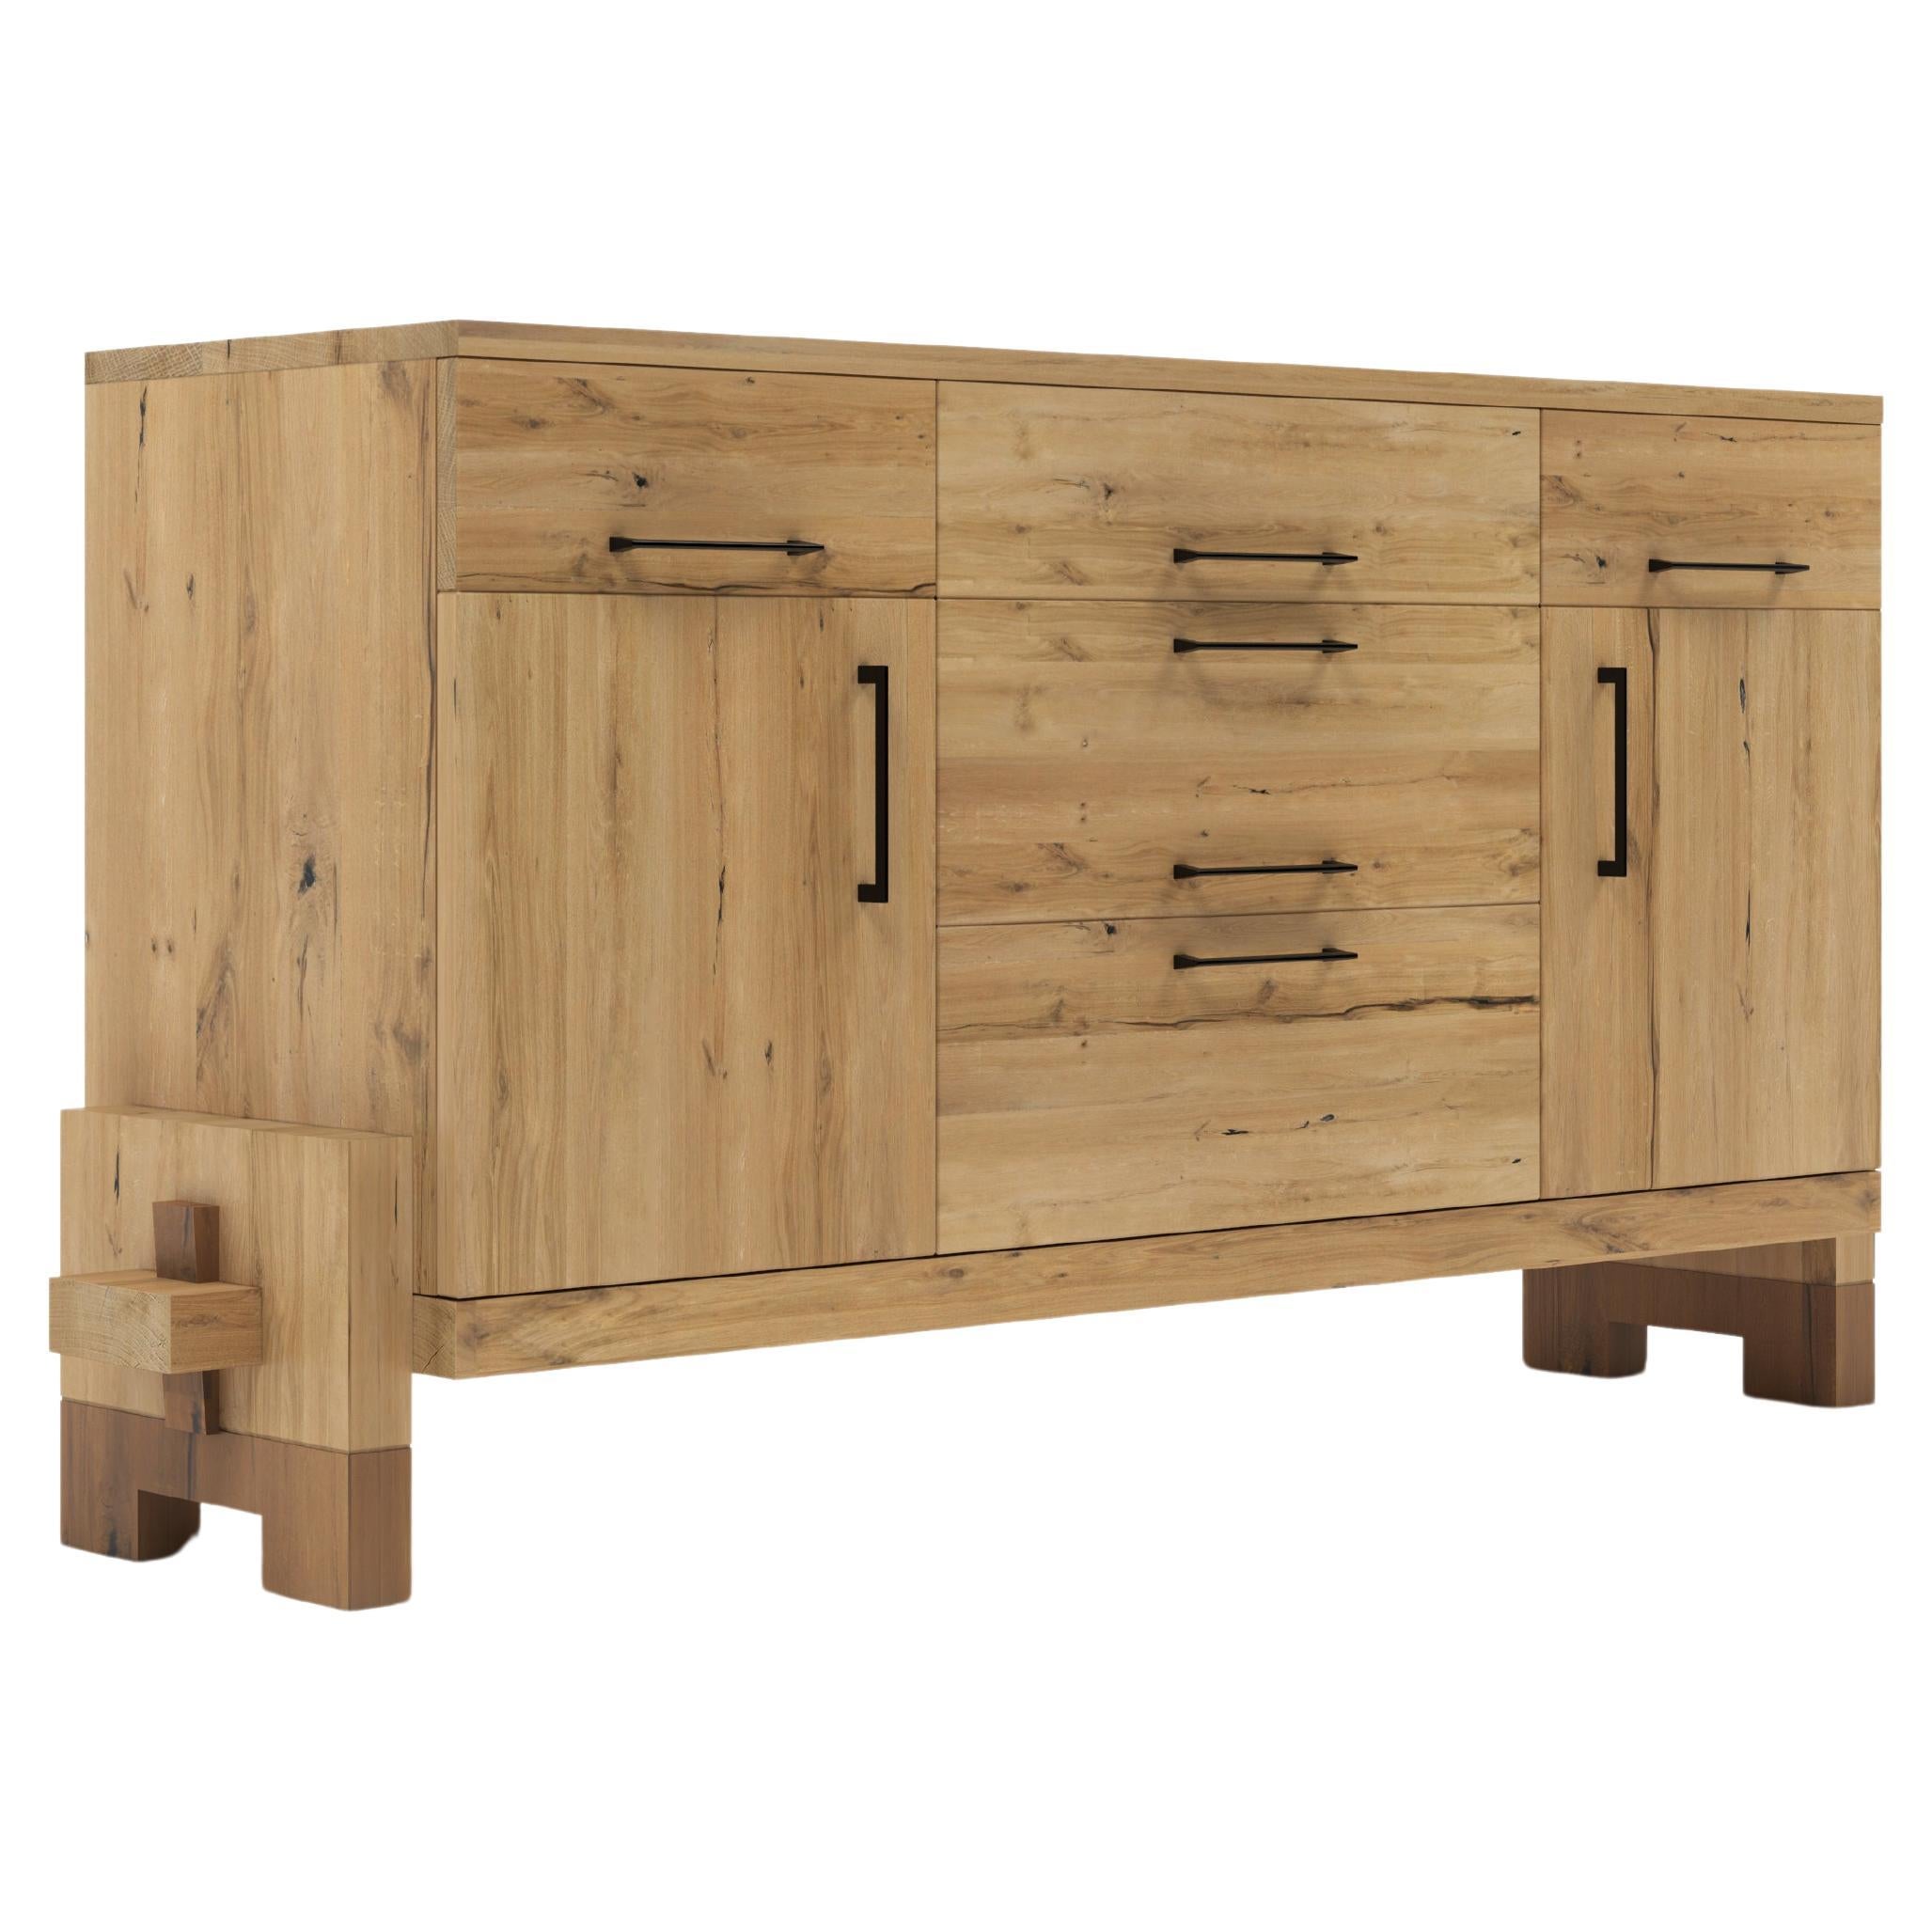 Tekton Furniture & Design House Commodes and Chests of Drawers